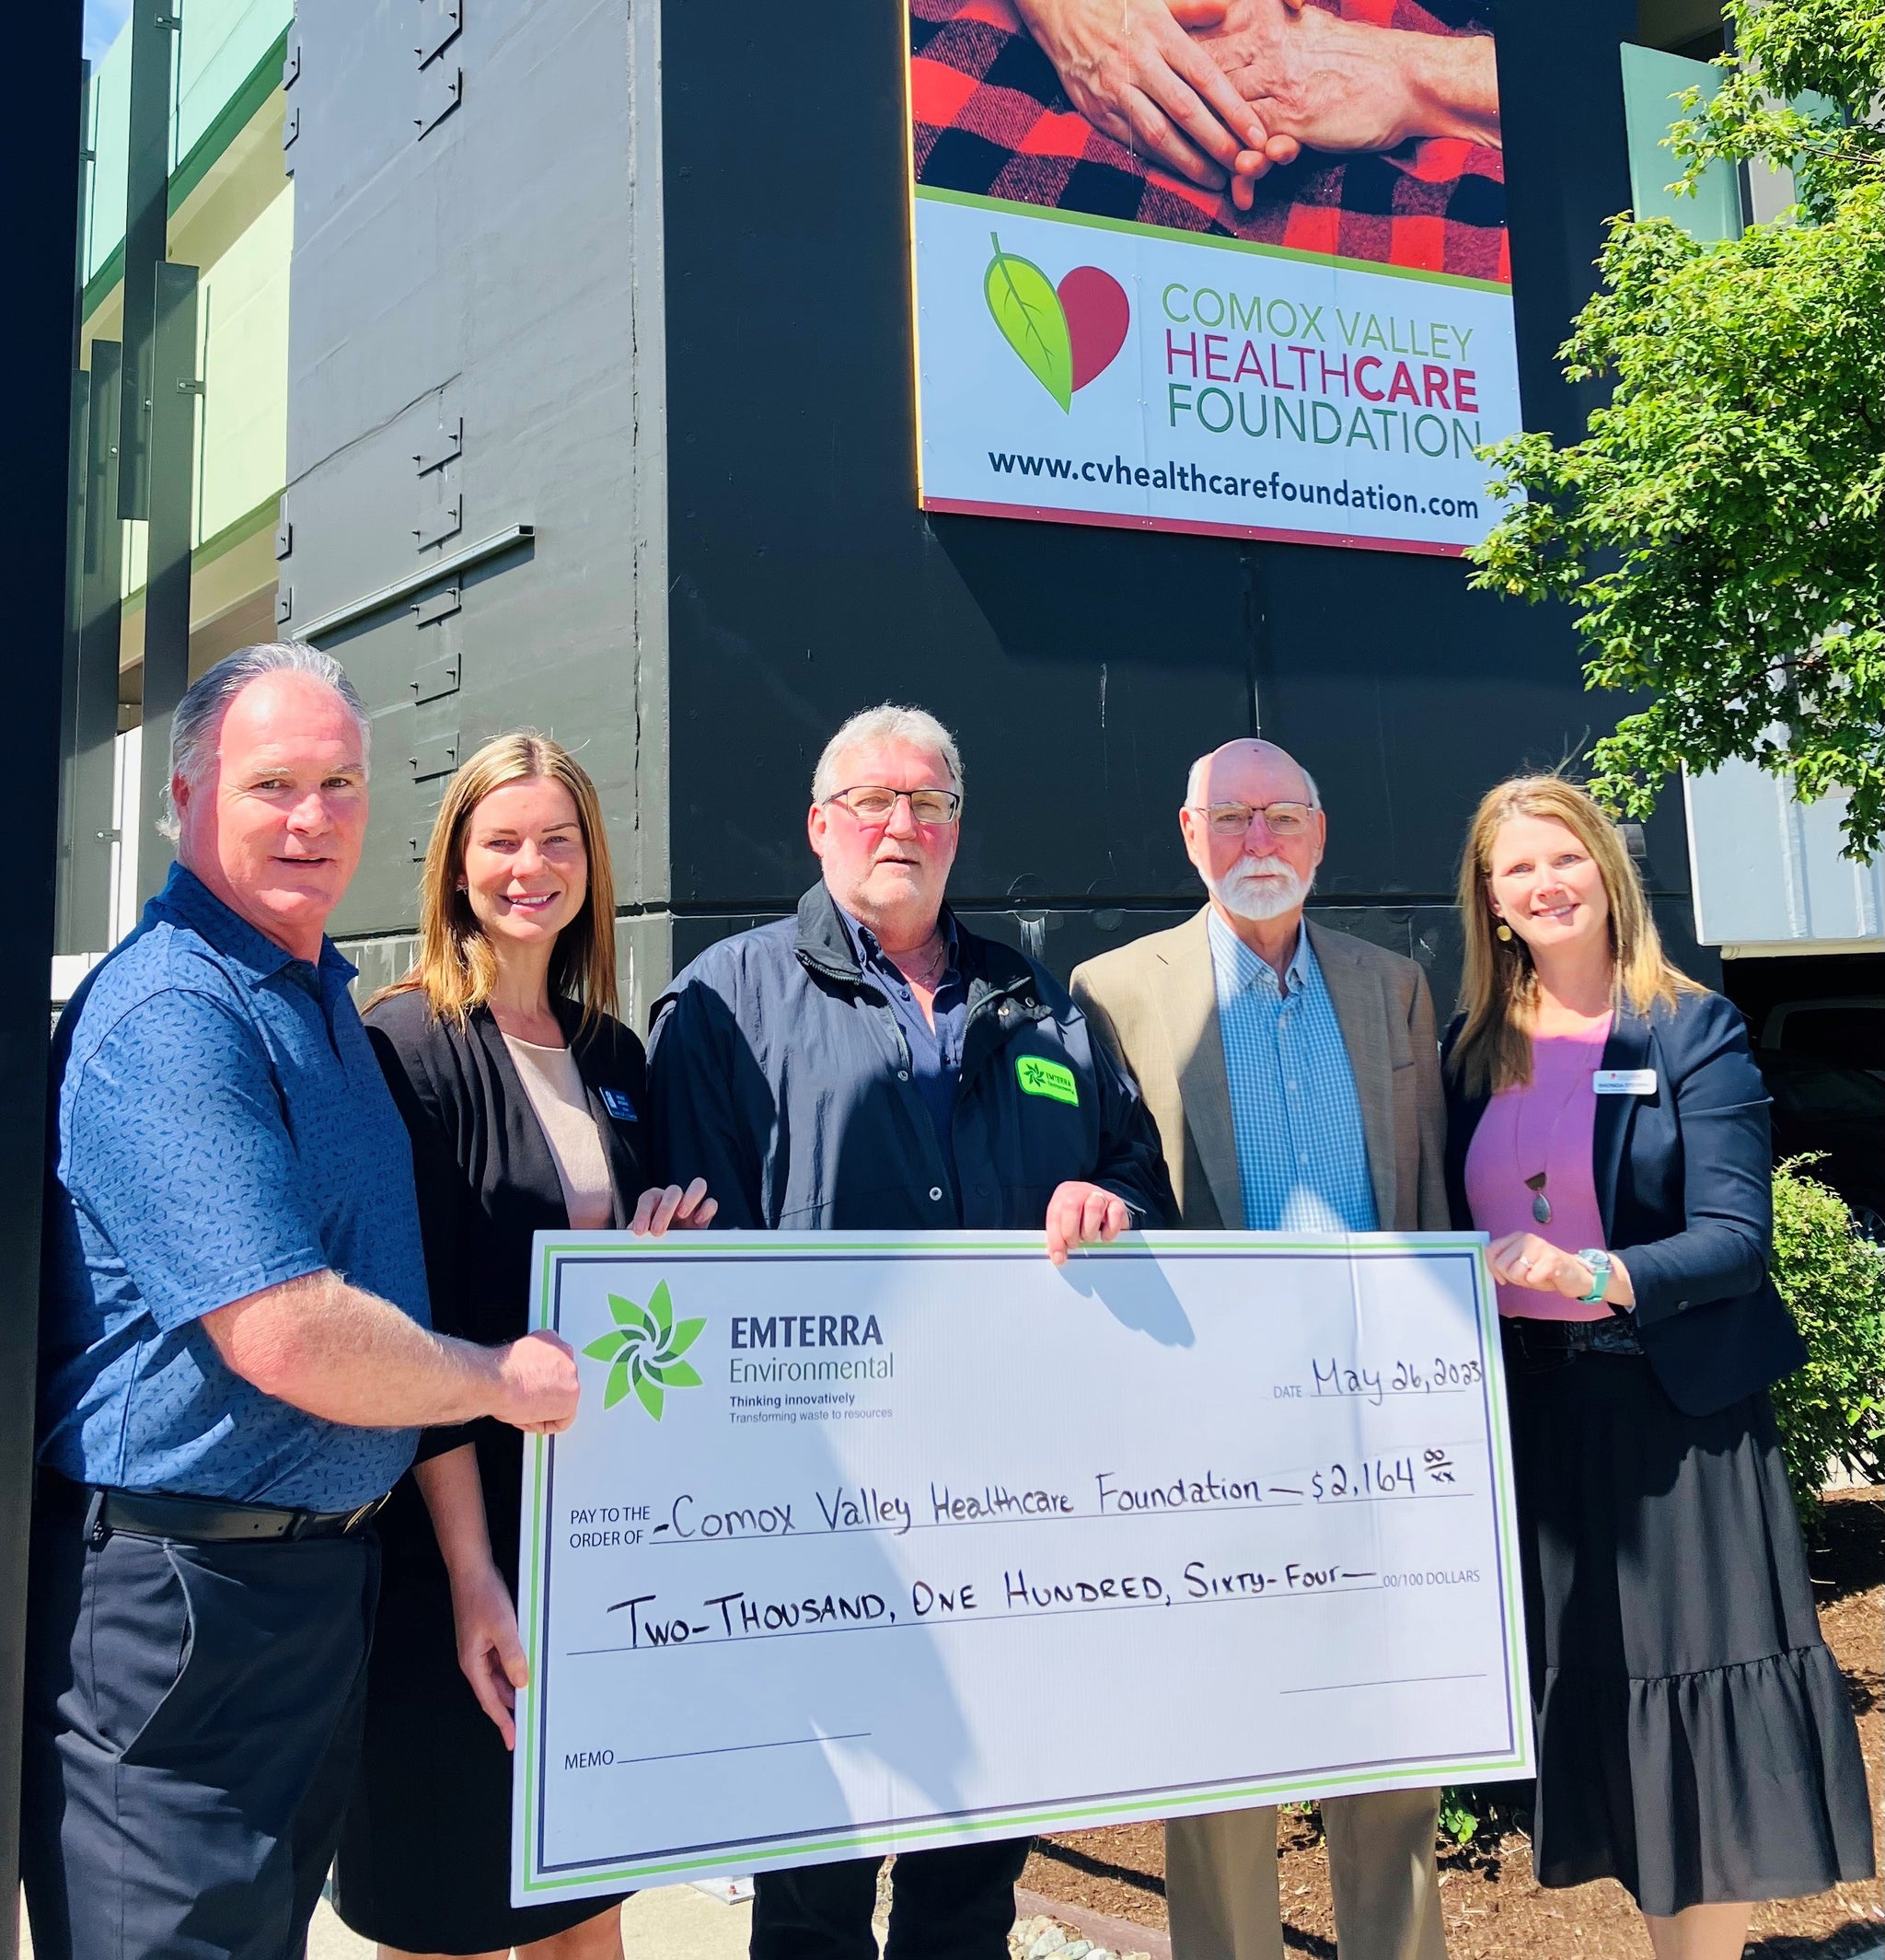 Emterra Group Donates More Than $30,000 to Local Healthcare Over 14 Years